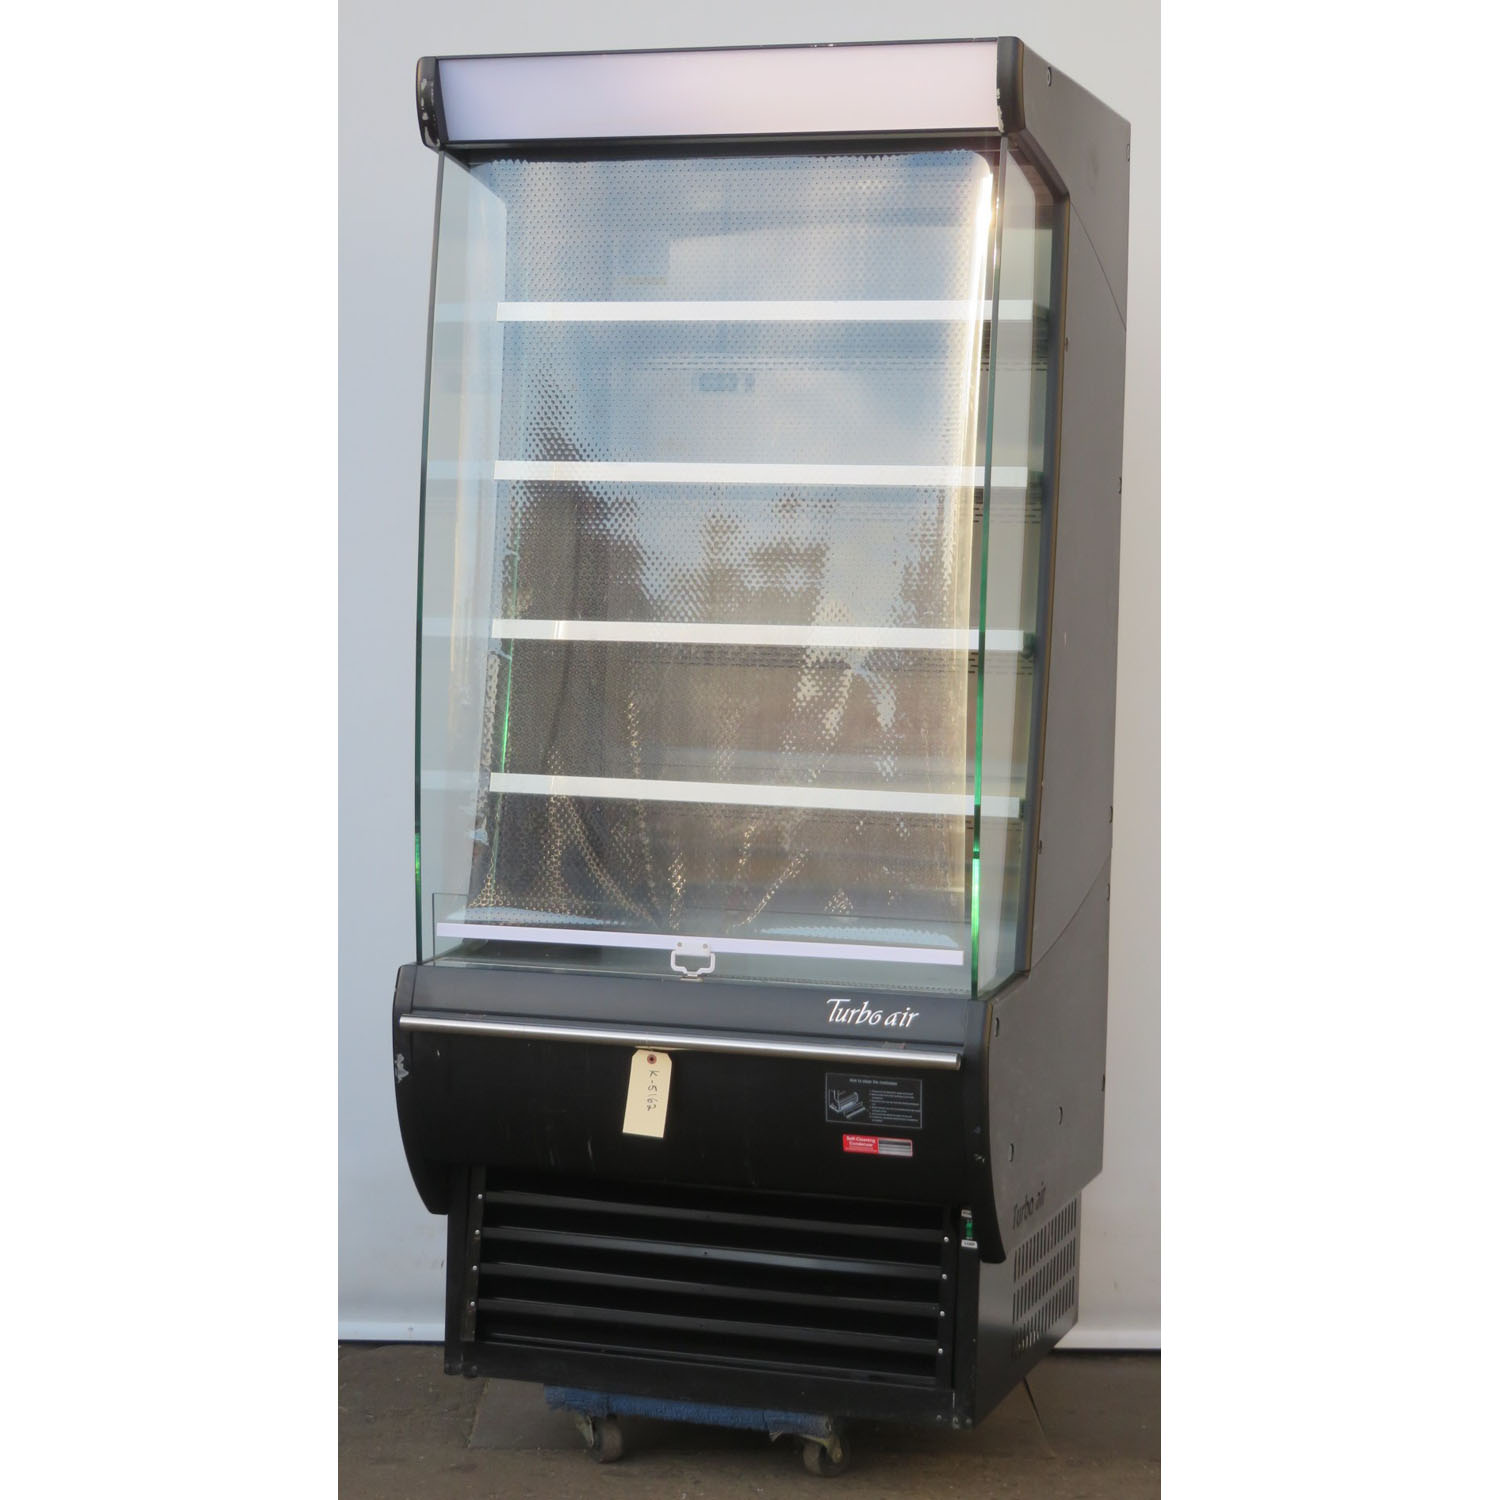 Turbo Air TOM-36DXB 36" Open Case Refrigerator, Used Excellent Condition image 2